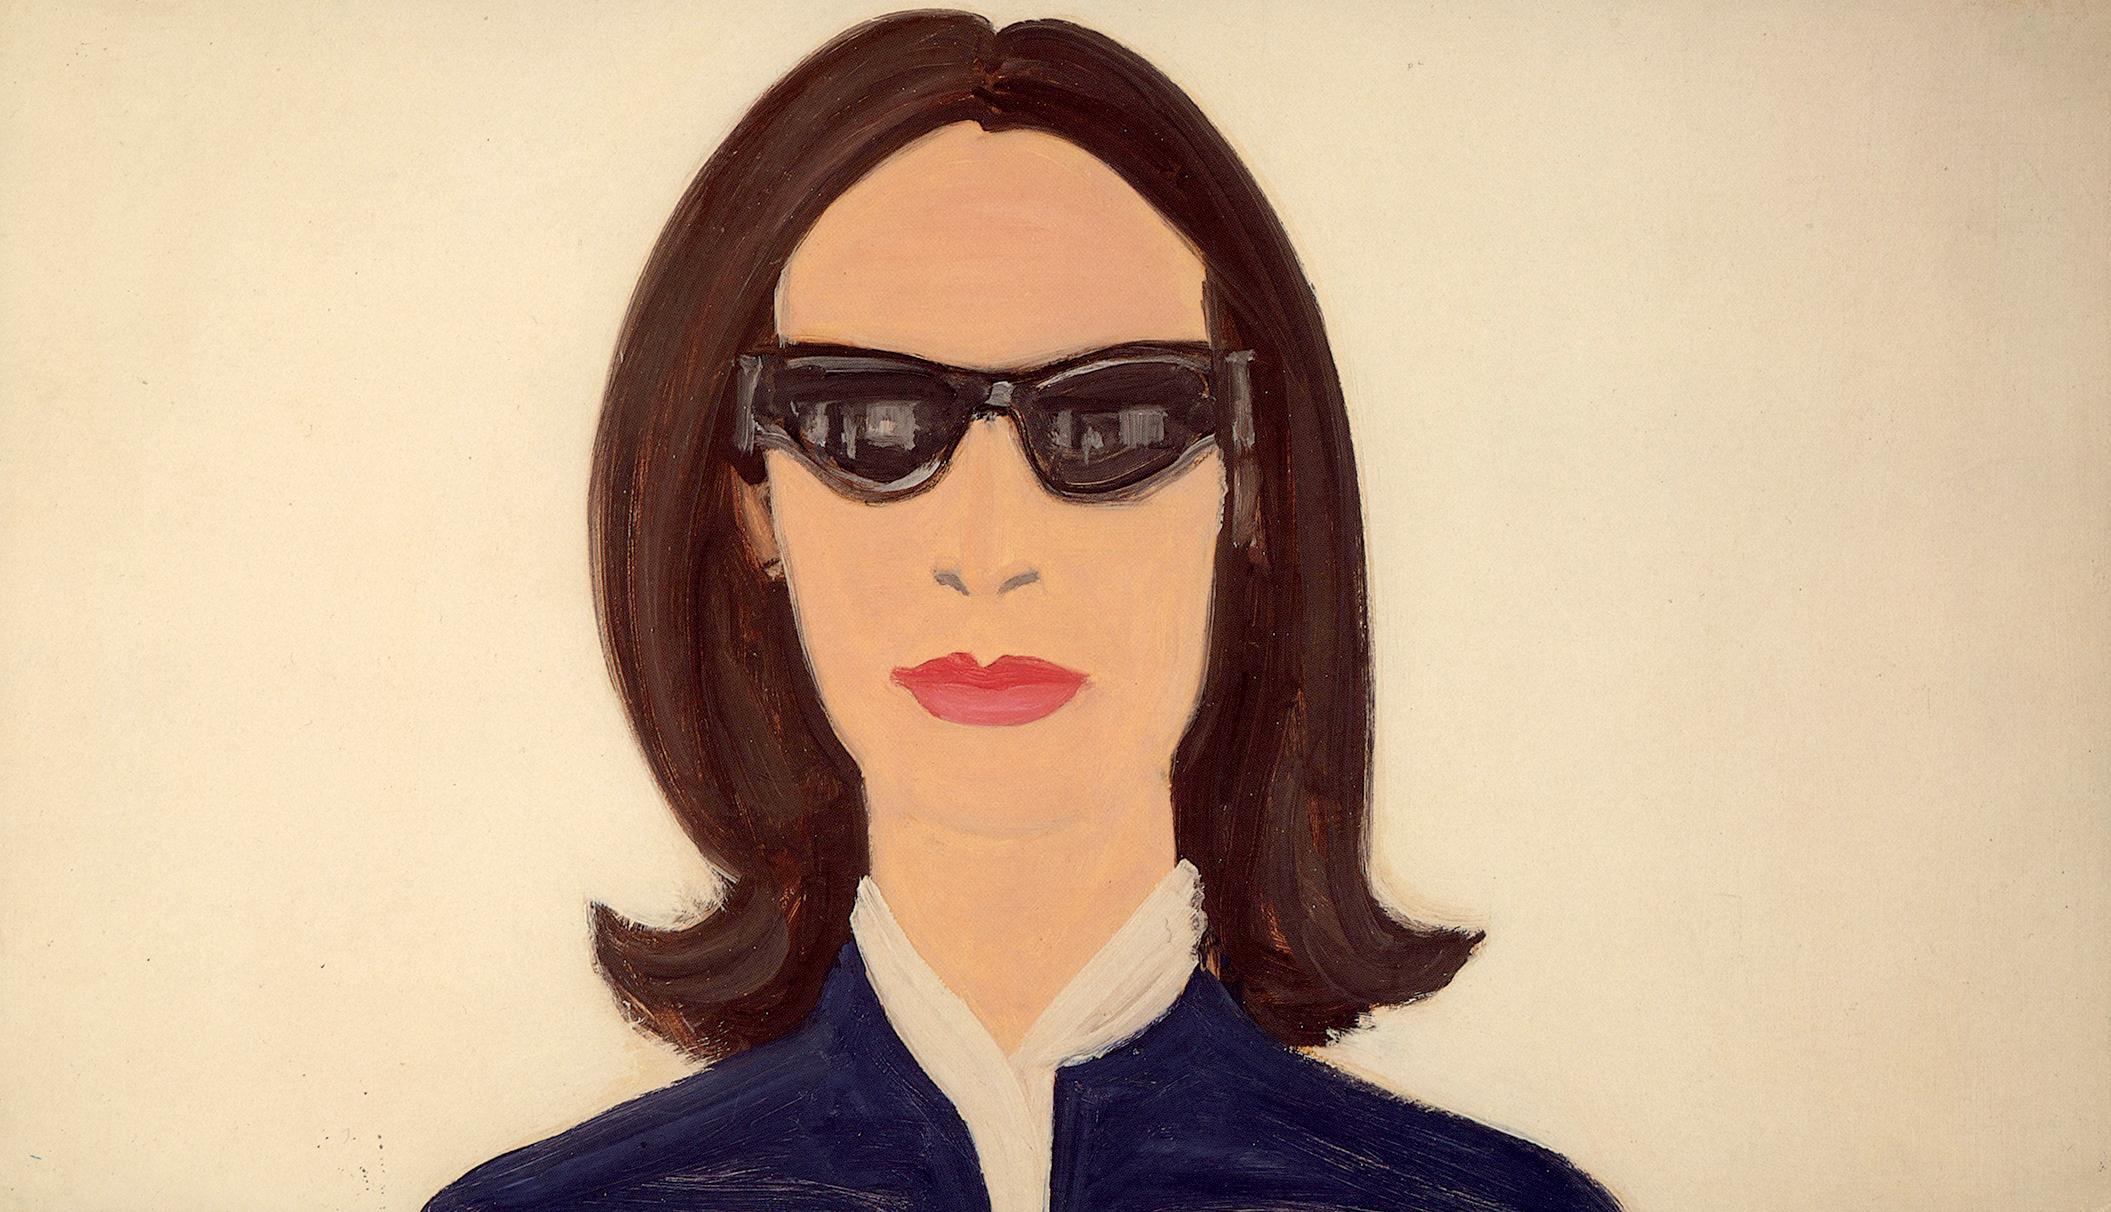 Alex Katz “From the 60's” announcement card 1987:
Rare vintage Alex Katz announcement card published on the occasion of Alex Katz 'From the 60's' Robert Miller Gallery New York 1987.

10 x 5.75 inches.
Minor age related wear; good overall vintage